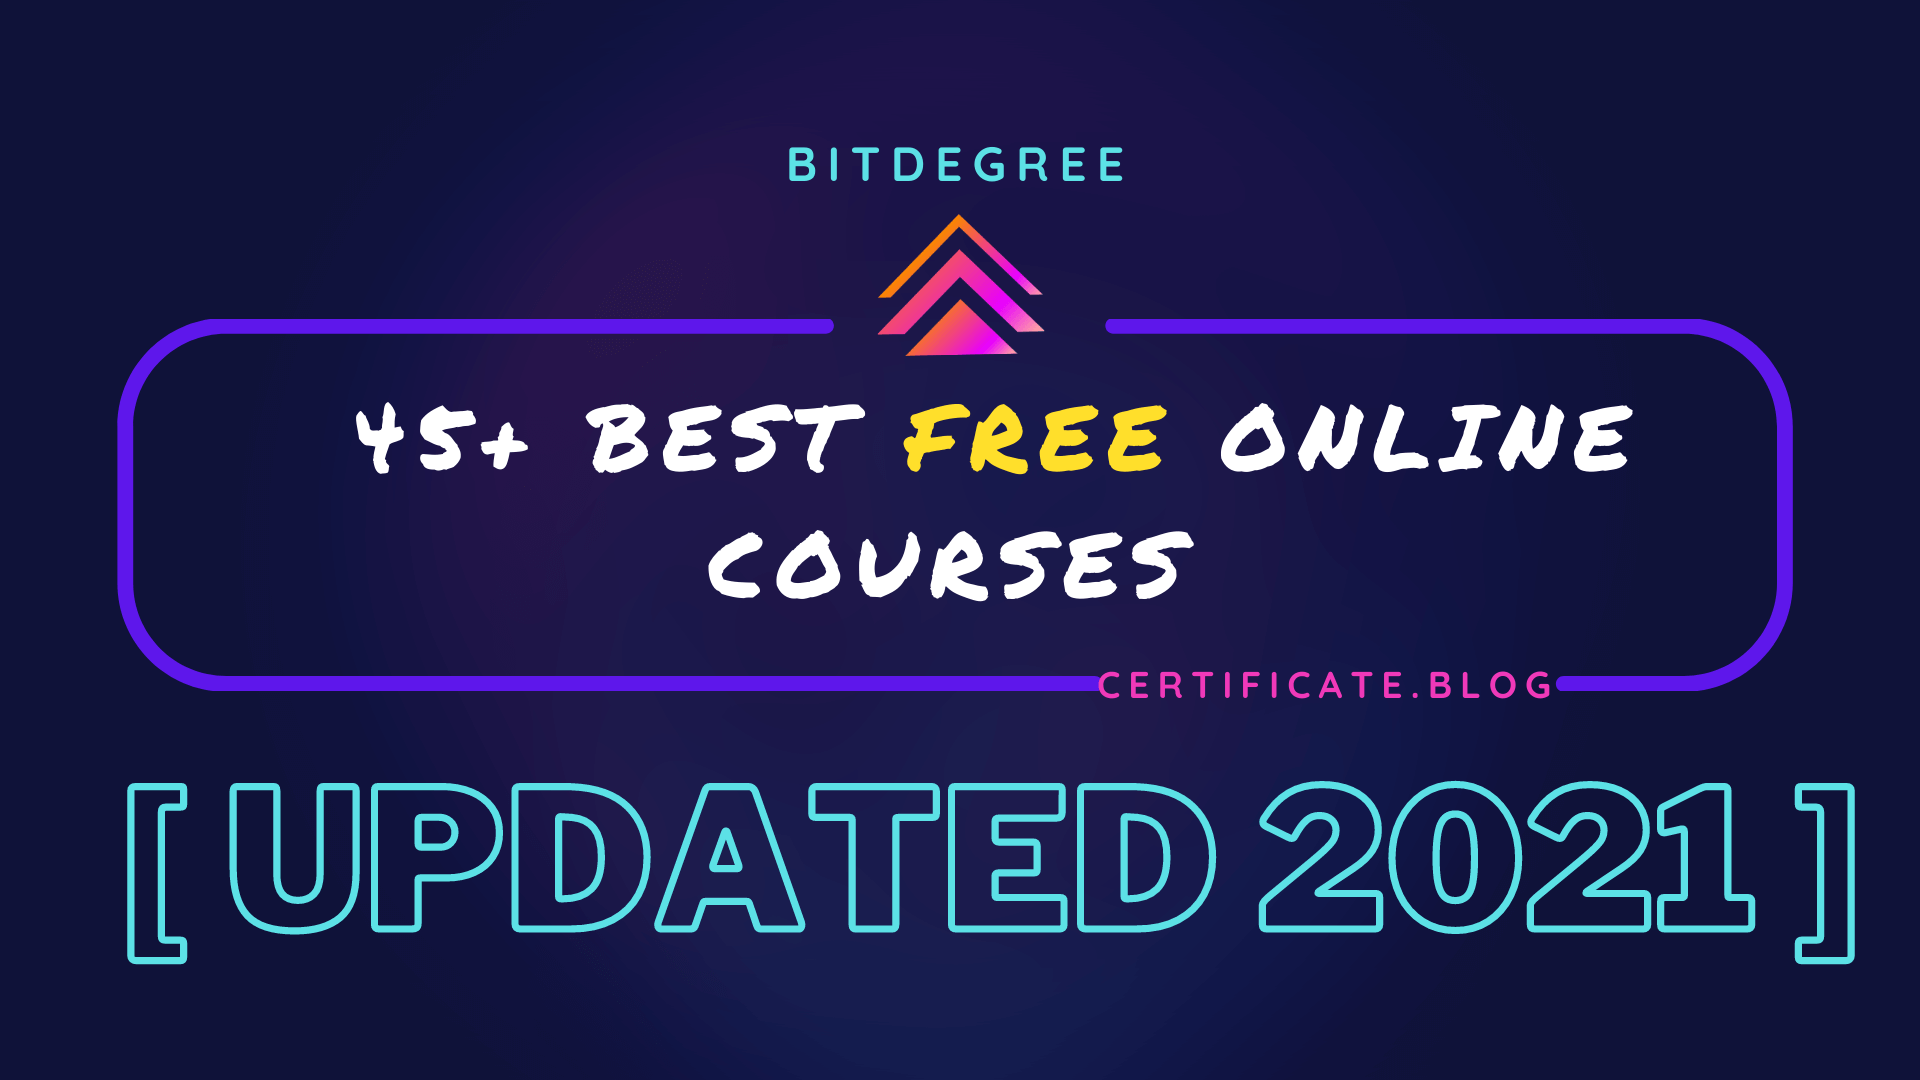 45+ Best Free Online Courses from Bitdegree [UPDATED January 2021]